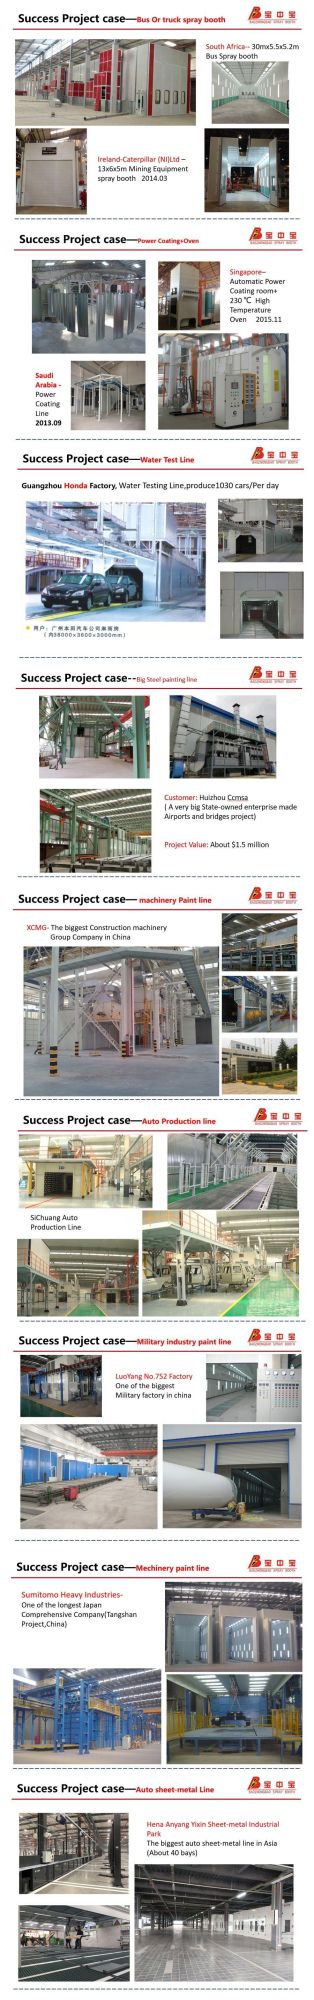 Wind Power: Spraybooths for Blades and Nacelles China Spray Booth